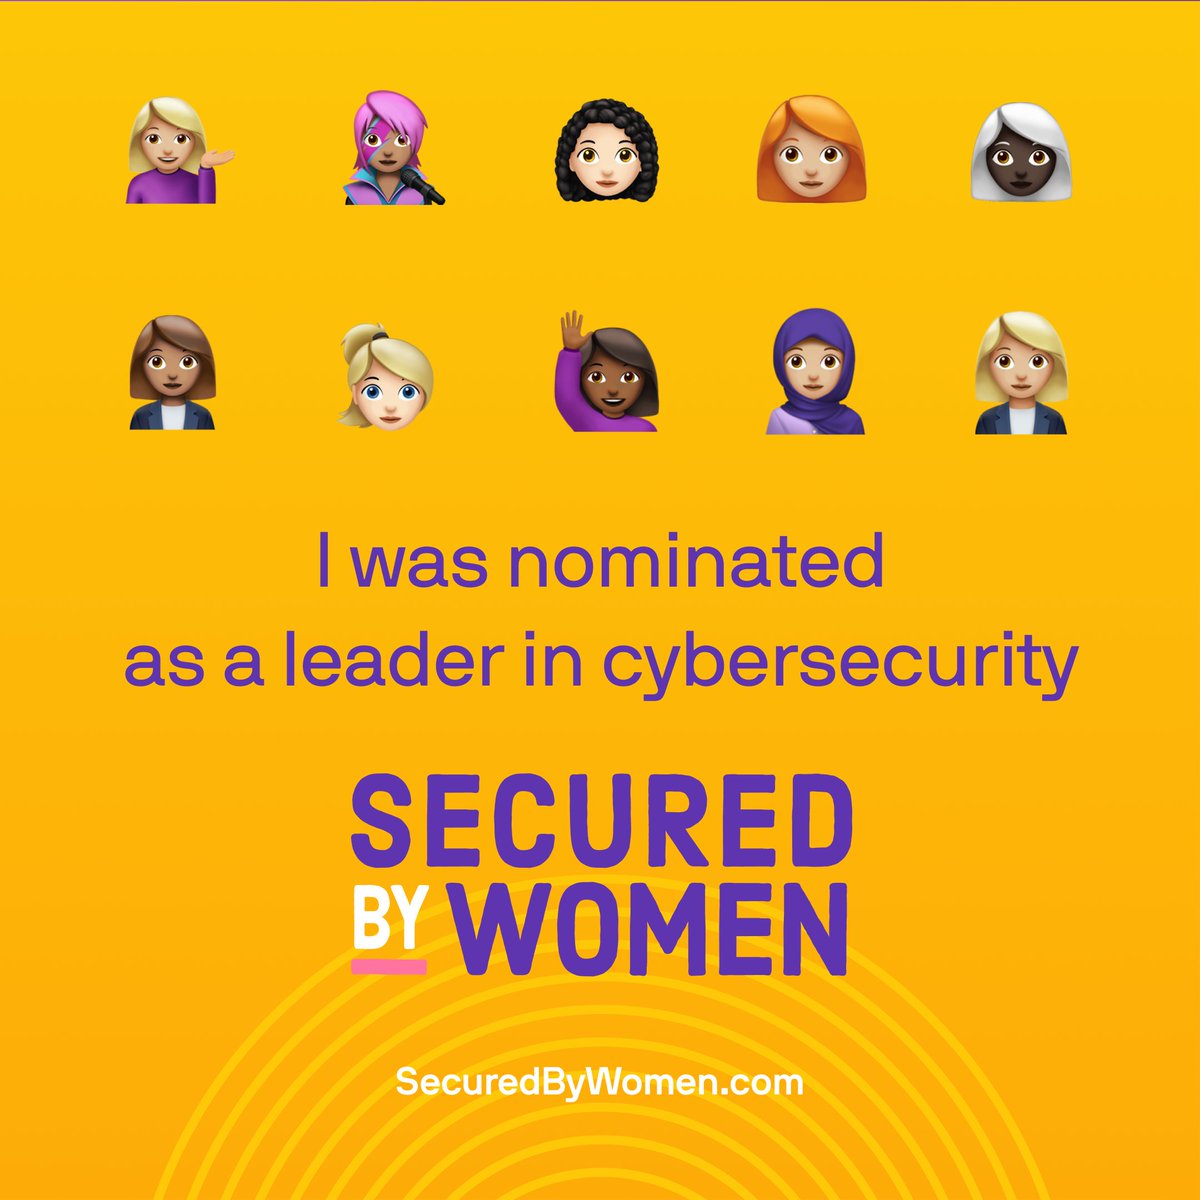 Oh wow....I just checked my email and found that I've been nominated as a leader in #CyberSecurity  for a campaign that is being run by @Lacework 
called #SecuredByWomen, I can't believe it! I wish I knew who it was so I could say thank you, this is absolutely made my day 😍🥰 xx